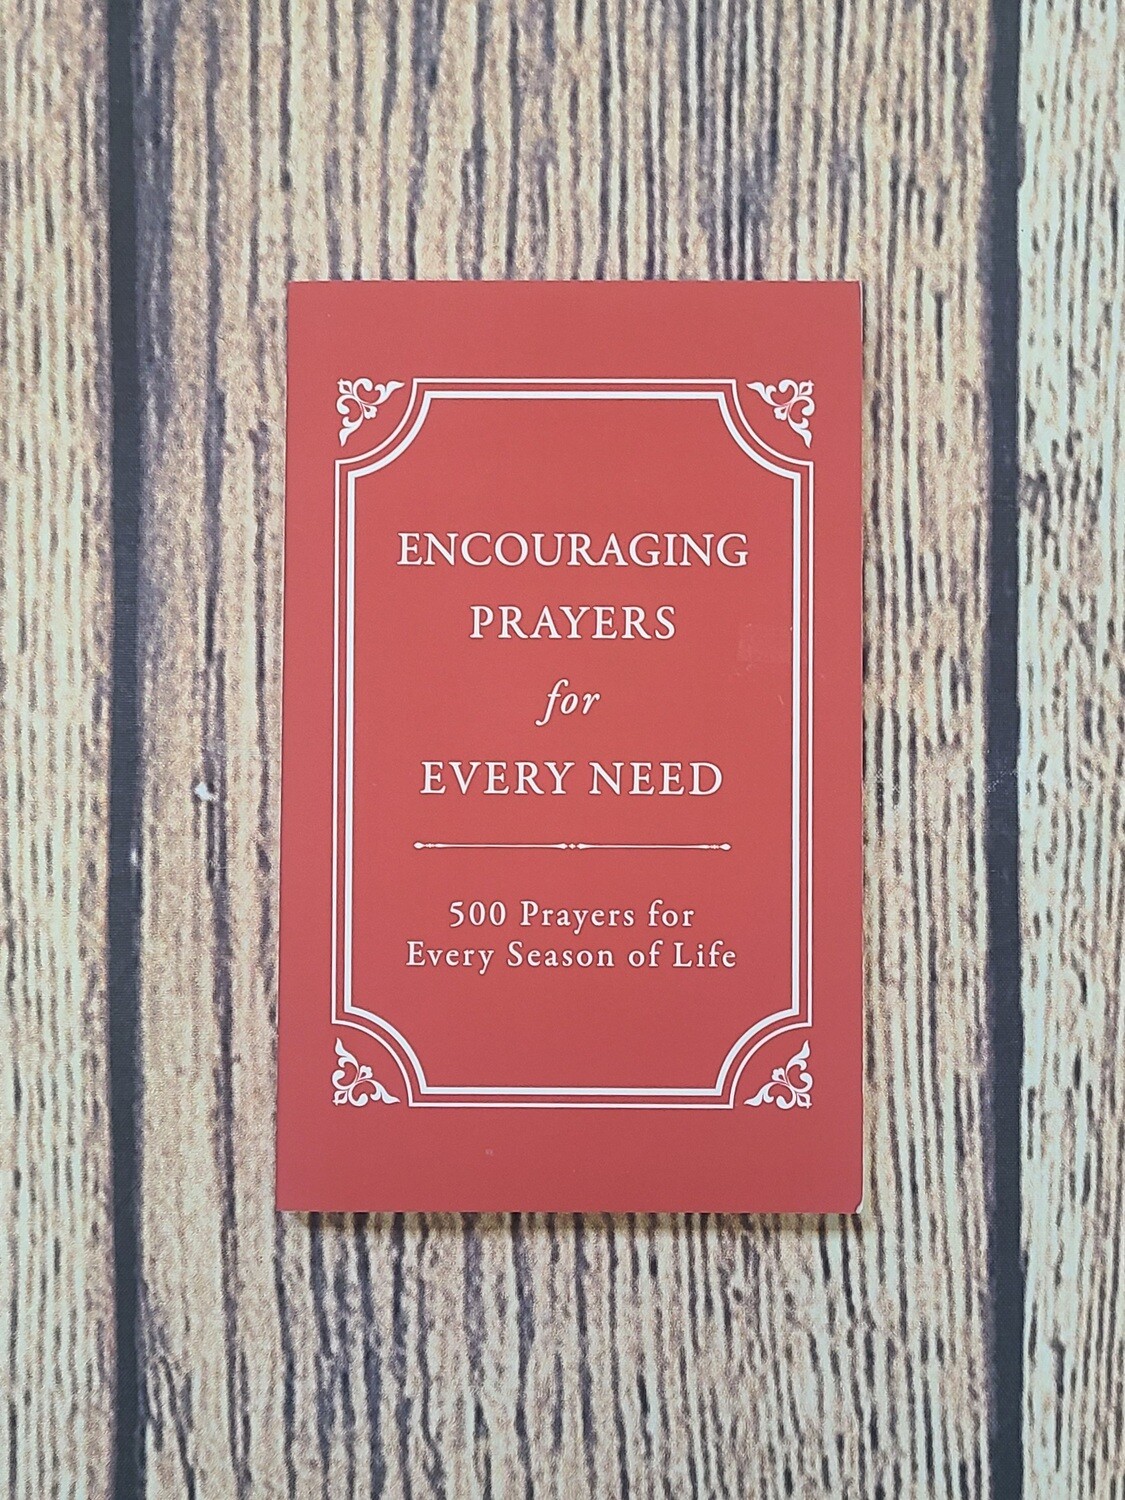 Encouraging Prayers for Every Need: 500 Prayers for Every Season of Life by Rebecca Currington